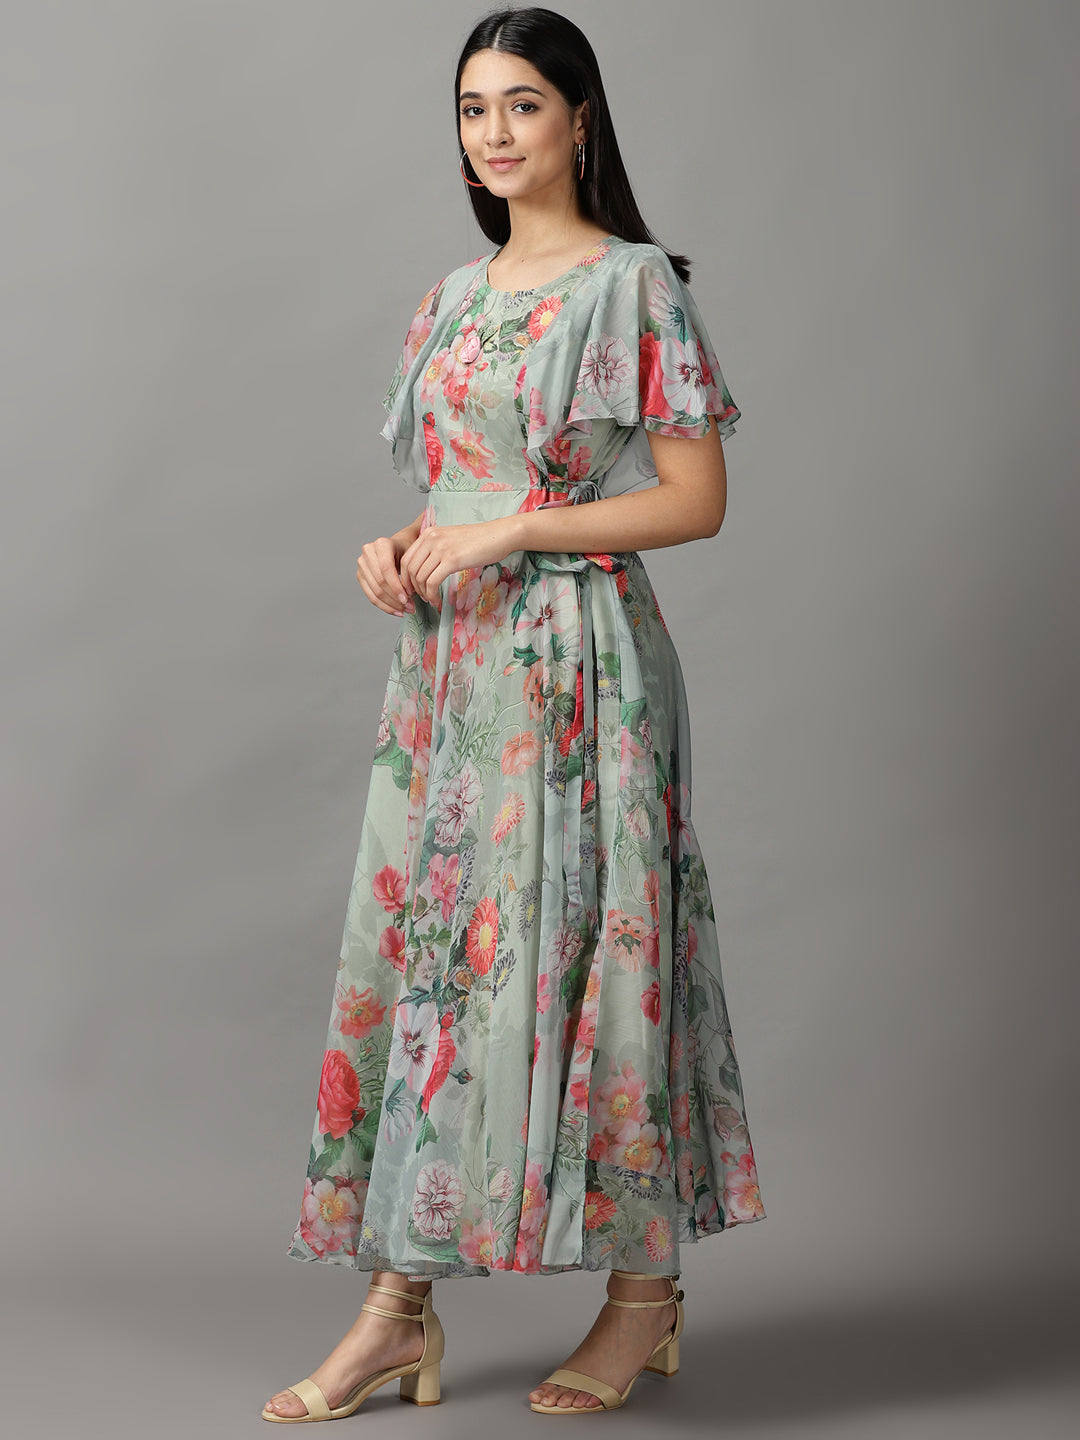 Women's Green Floral Fit and Flare Dress